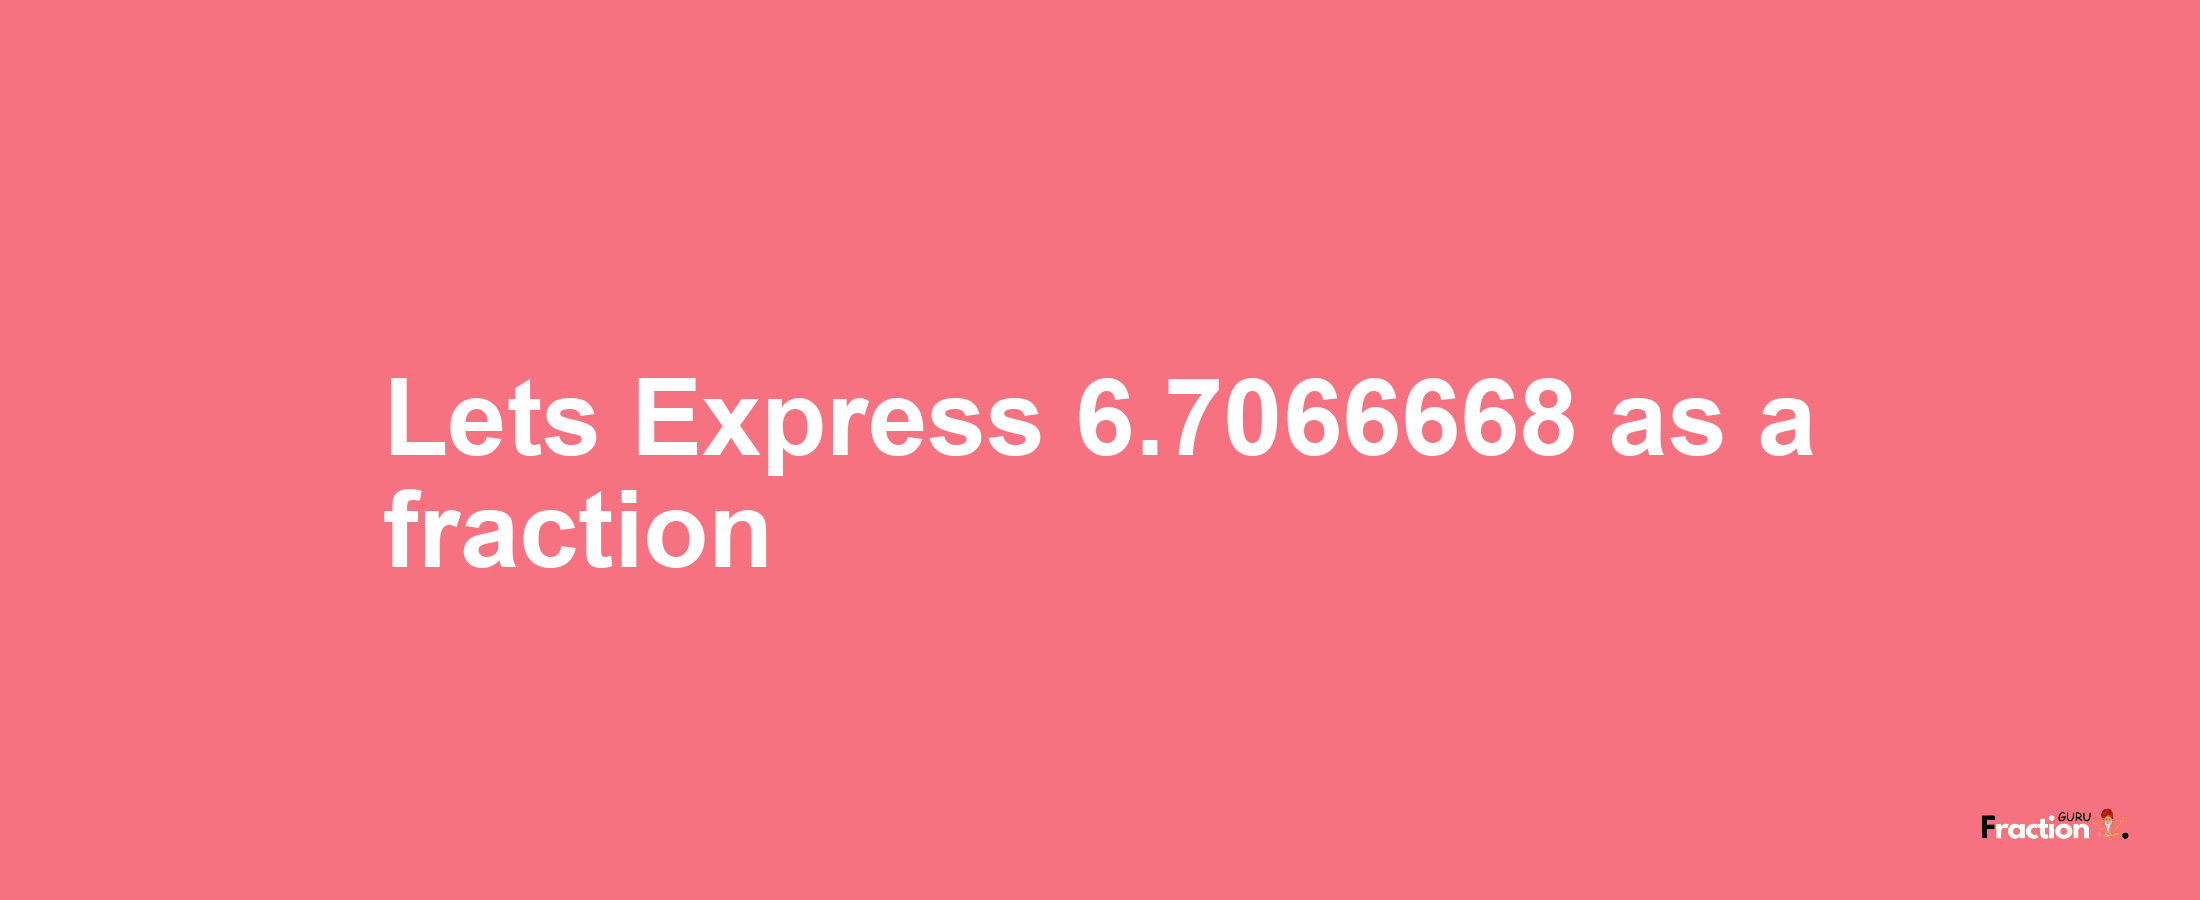 Lets Express 6.7066668 as afraction